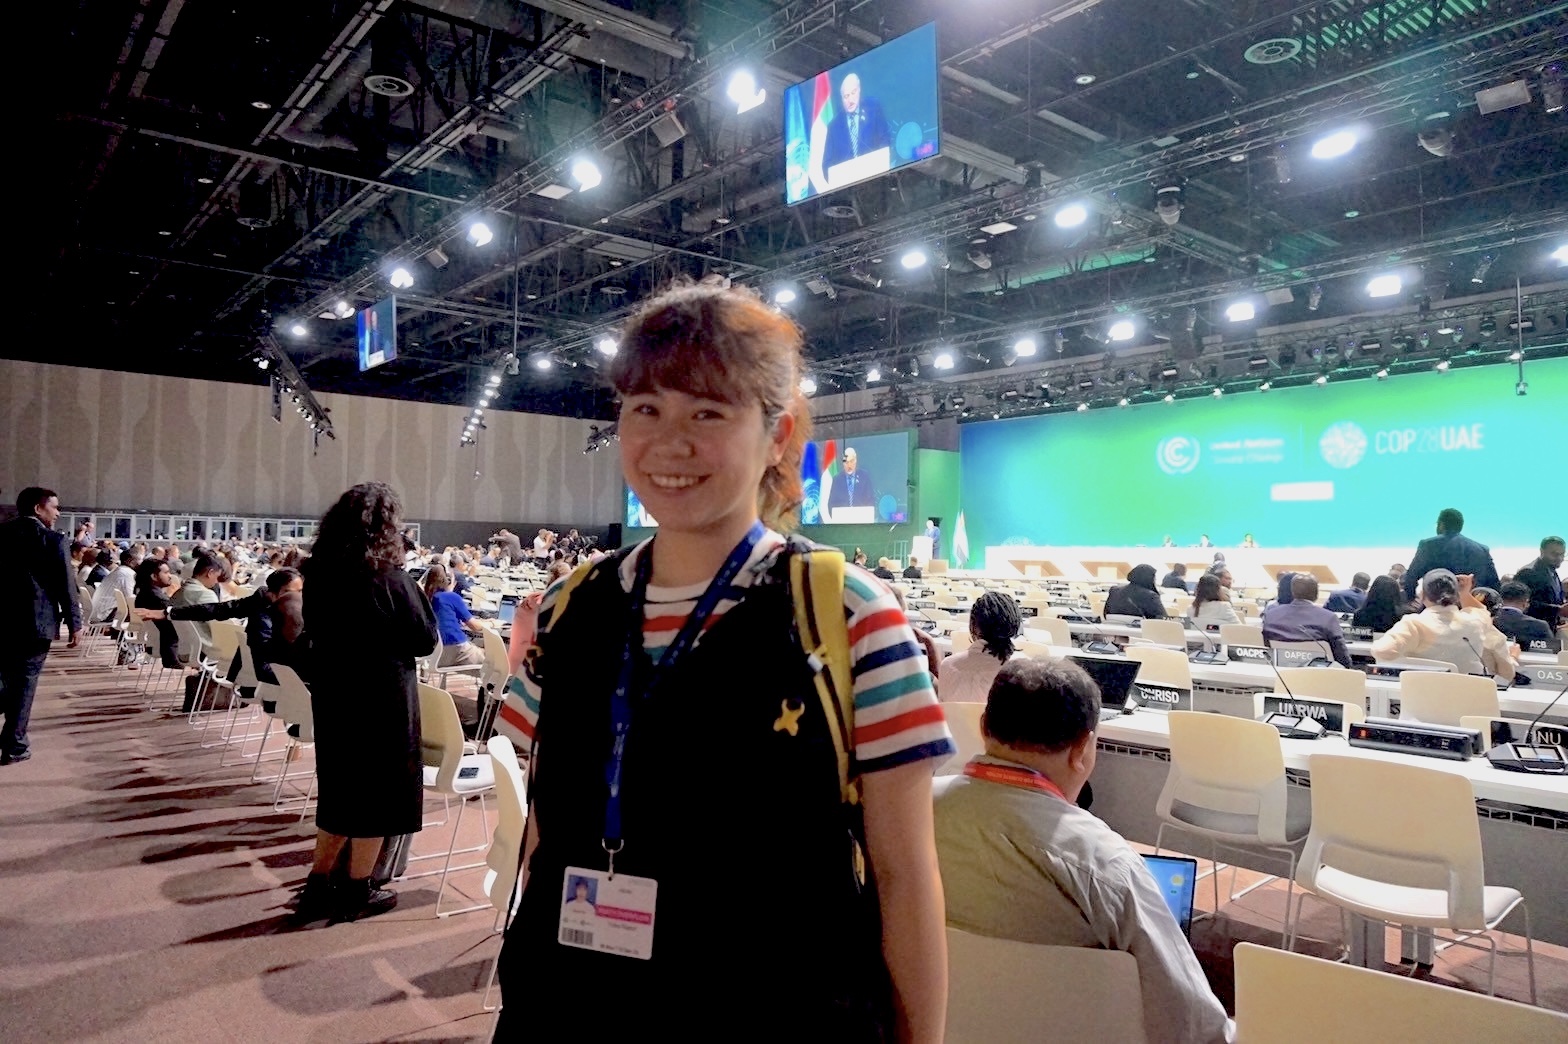 Contributing article about interviews we conducted at COP28 for The Asahi Shimbun newspaper